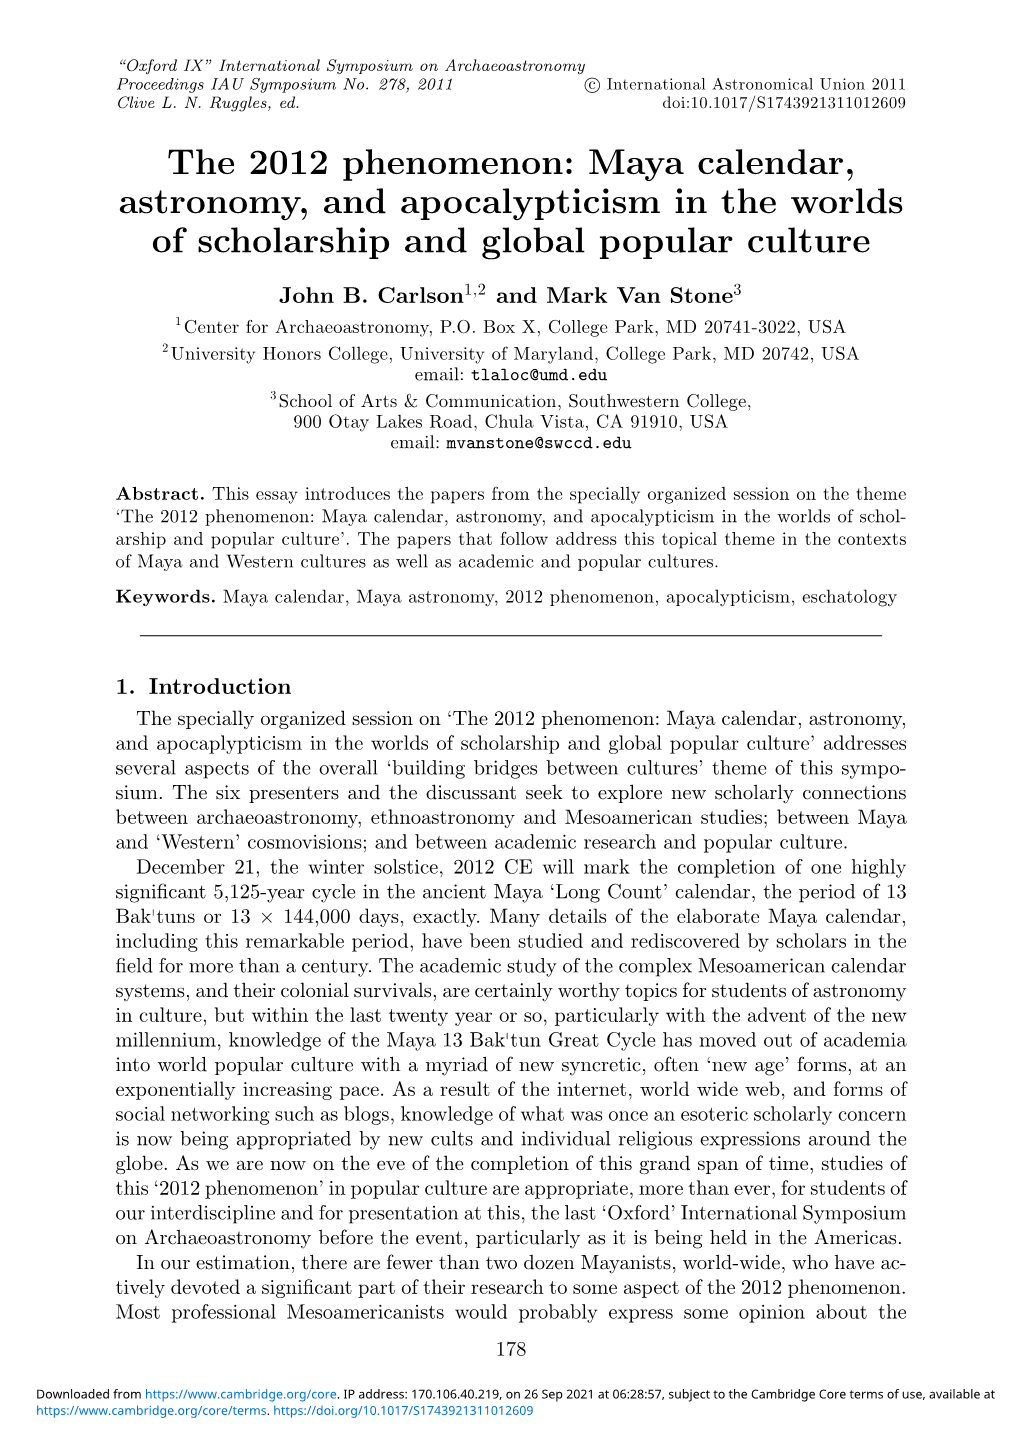 The 2012 Phenomenon: Maya Calendar, Astronomy, and Apocalypticism in the Worlds of Scholarship and Global Popular Culture